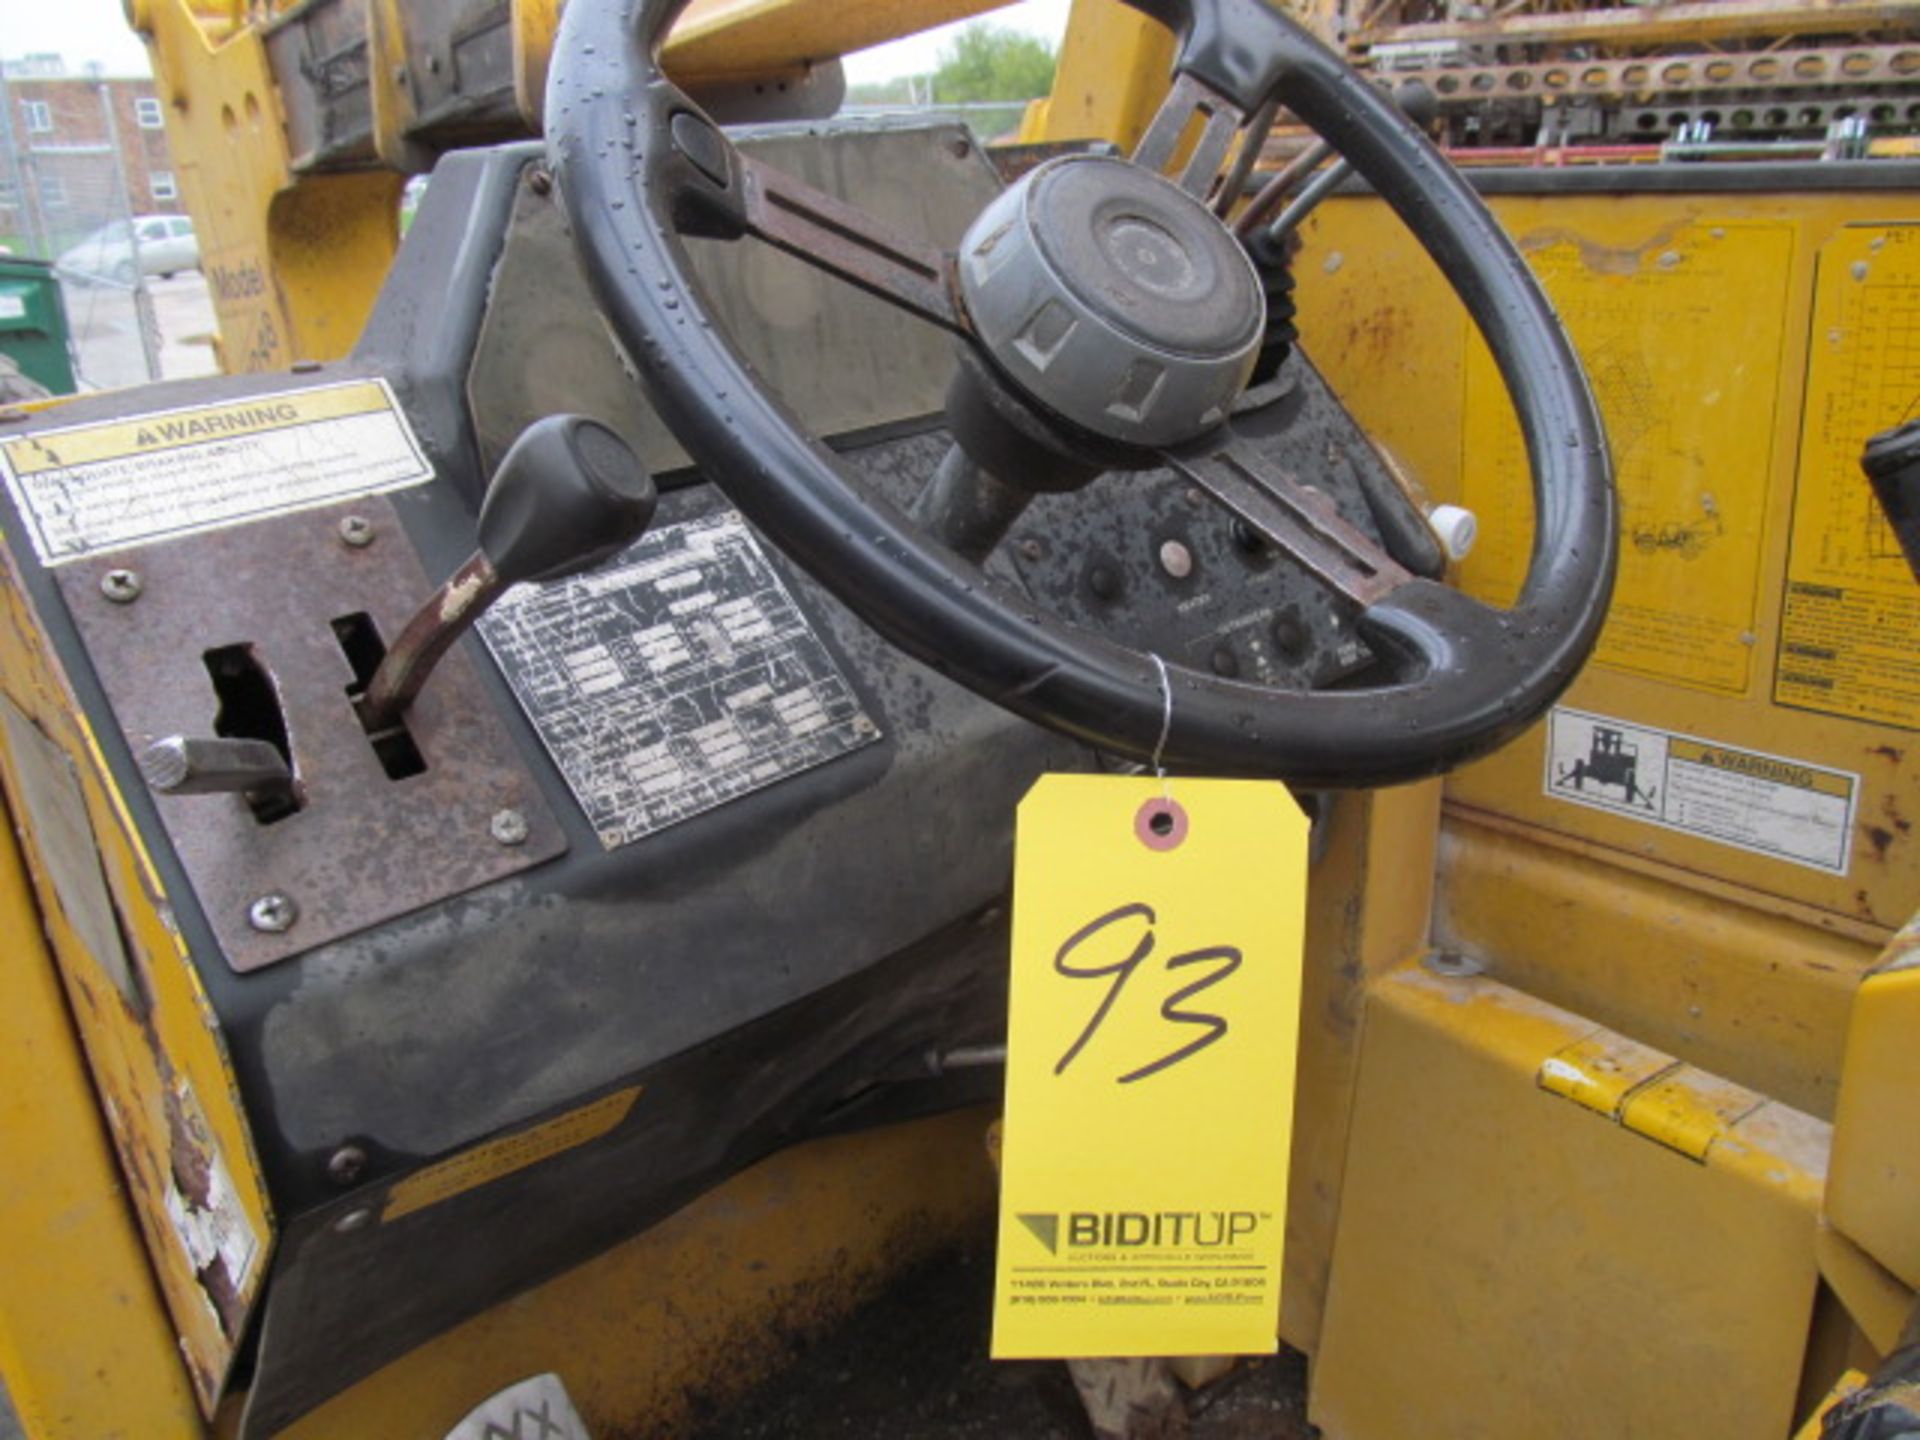 Pettibone Telescope Forklift 1048T S/N 6958, Located At: 305 Industrial Ln, Wheeling, IL 60090 - Image 3 of 4